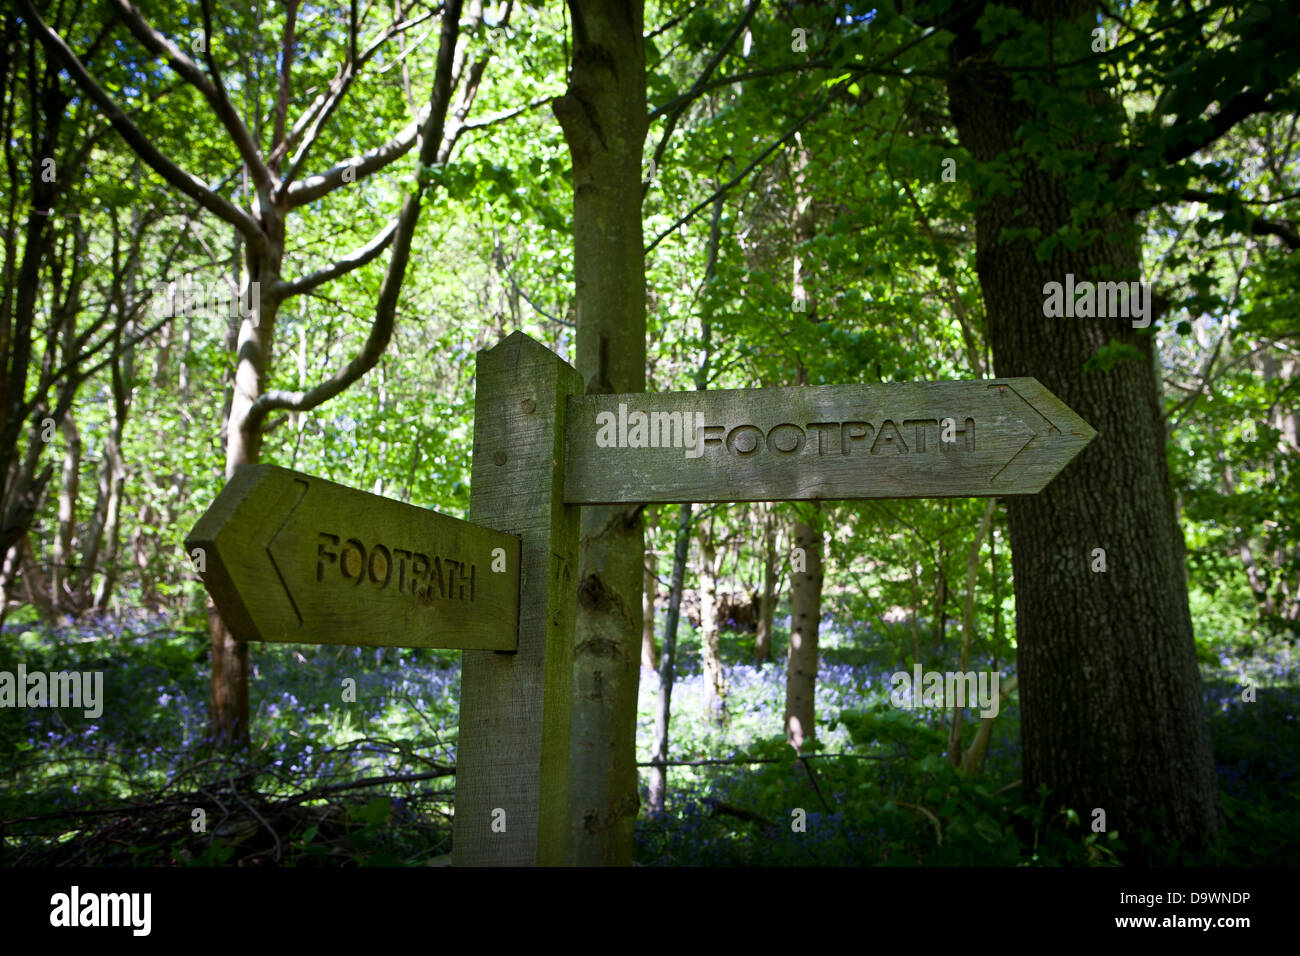 Public Footpath sign in a bluebell wood in dappled light Stock Photo